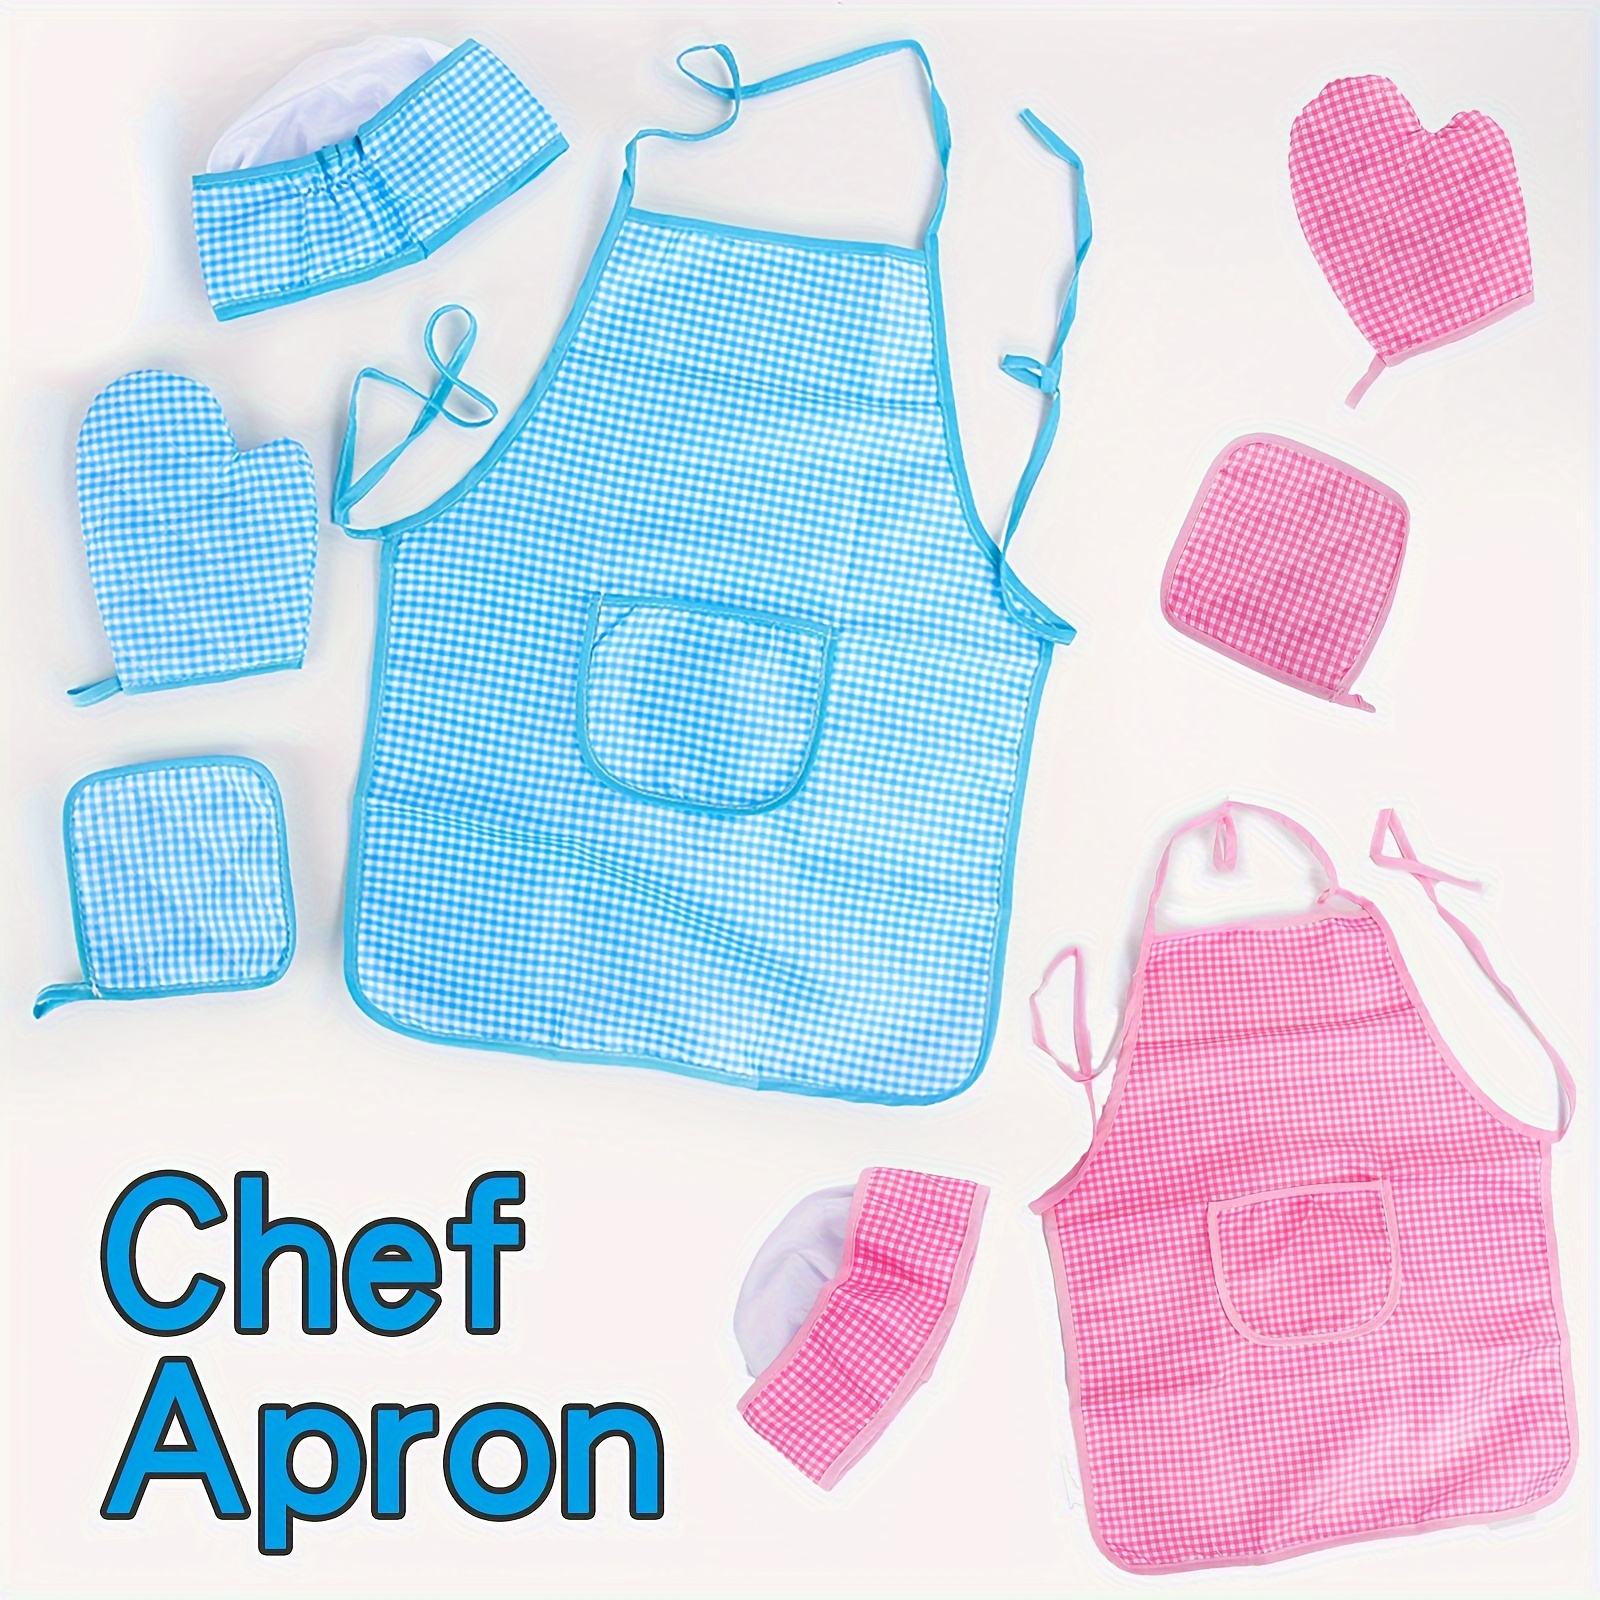 

Play House Toy, Role-playing Kitchen Clothes, Chef Set, Plaid Apron, Baking Toys Set